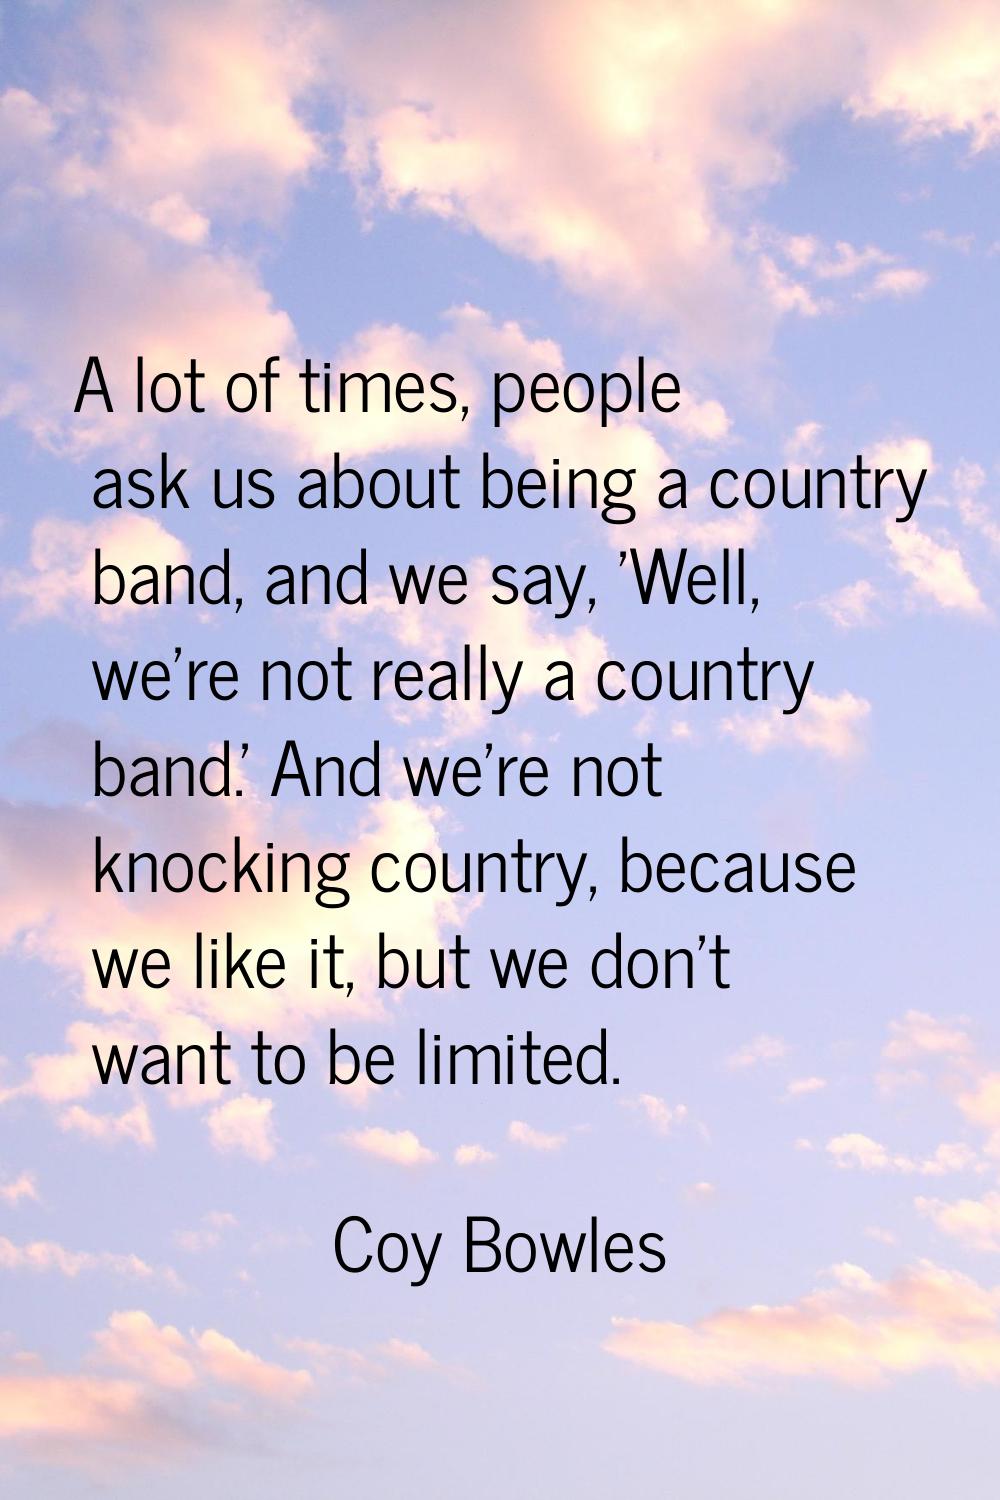 A lot of times, people ask us about being a country band, and we say, 'Well, we're not really a cou